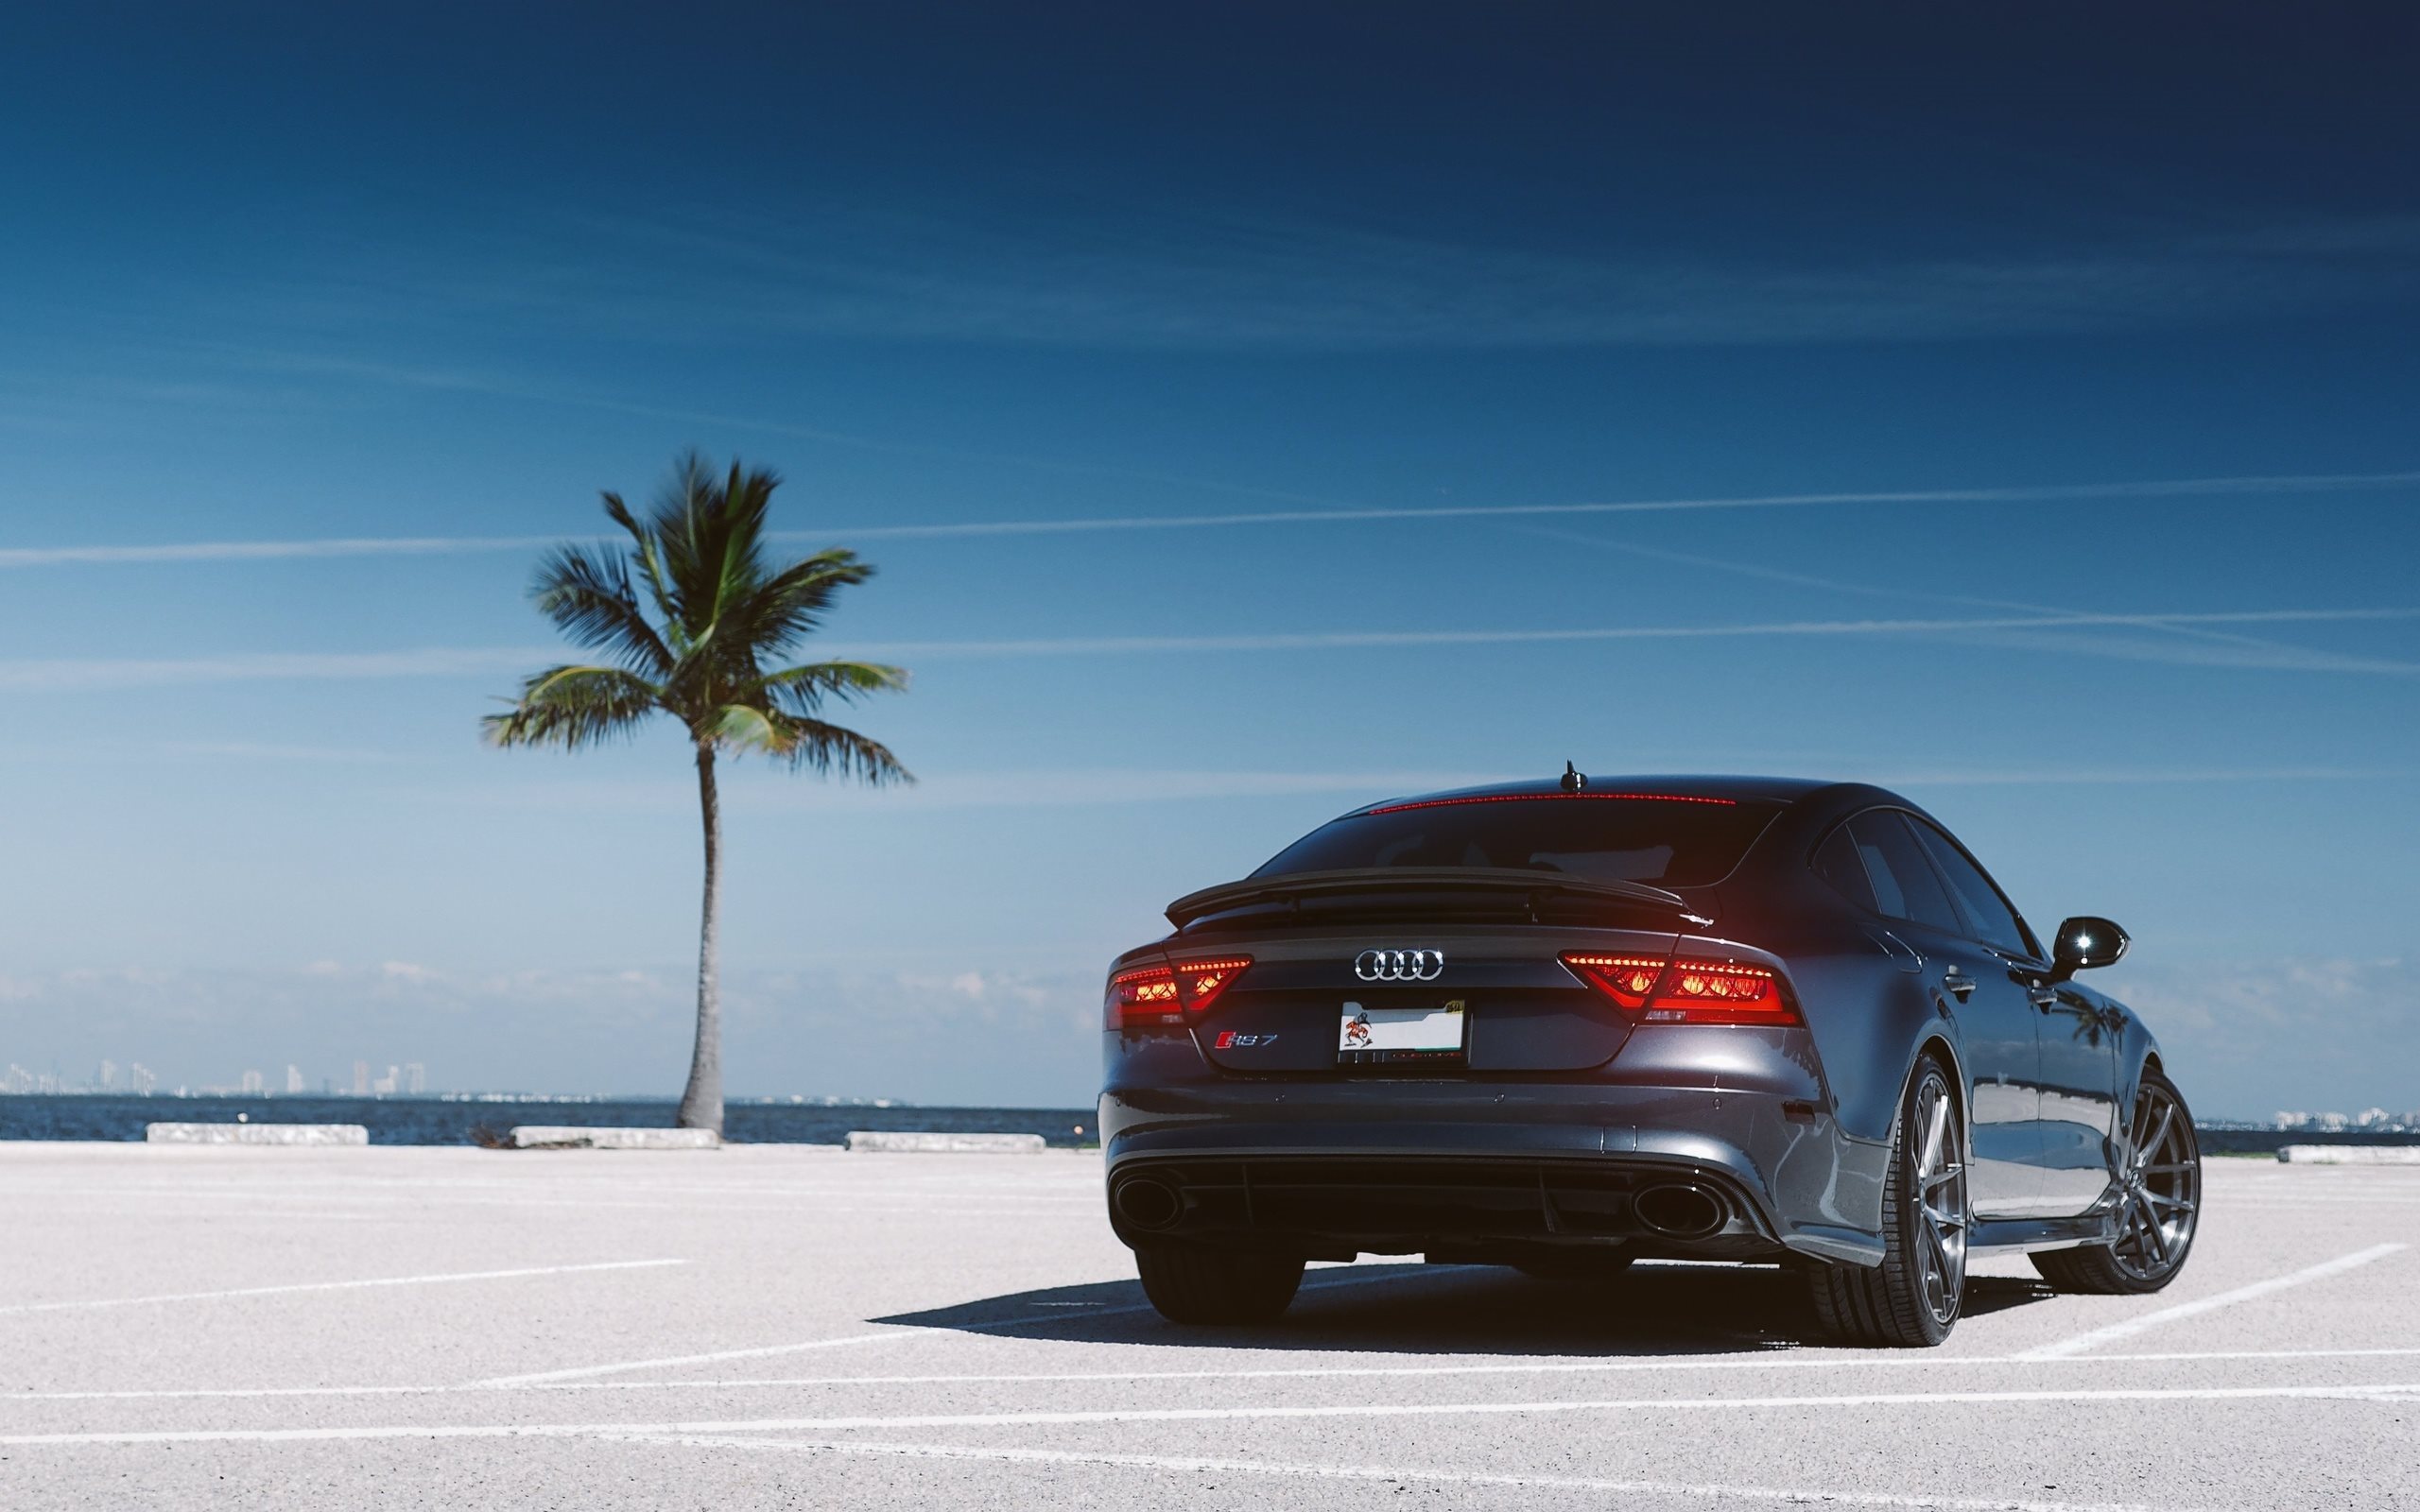 Audi Rs7 Sportback, Parking, Beach, Gray Rs7, Supercars, - Audi Rs7 , HD Wallpaper & Backgrounds